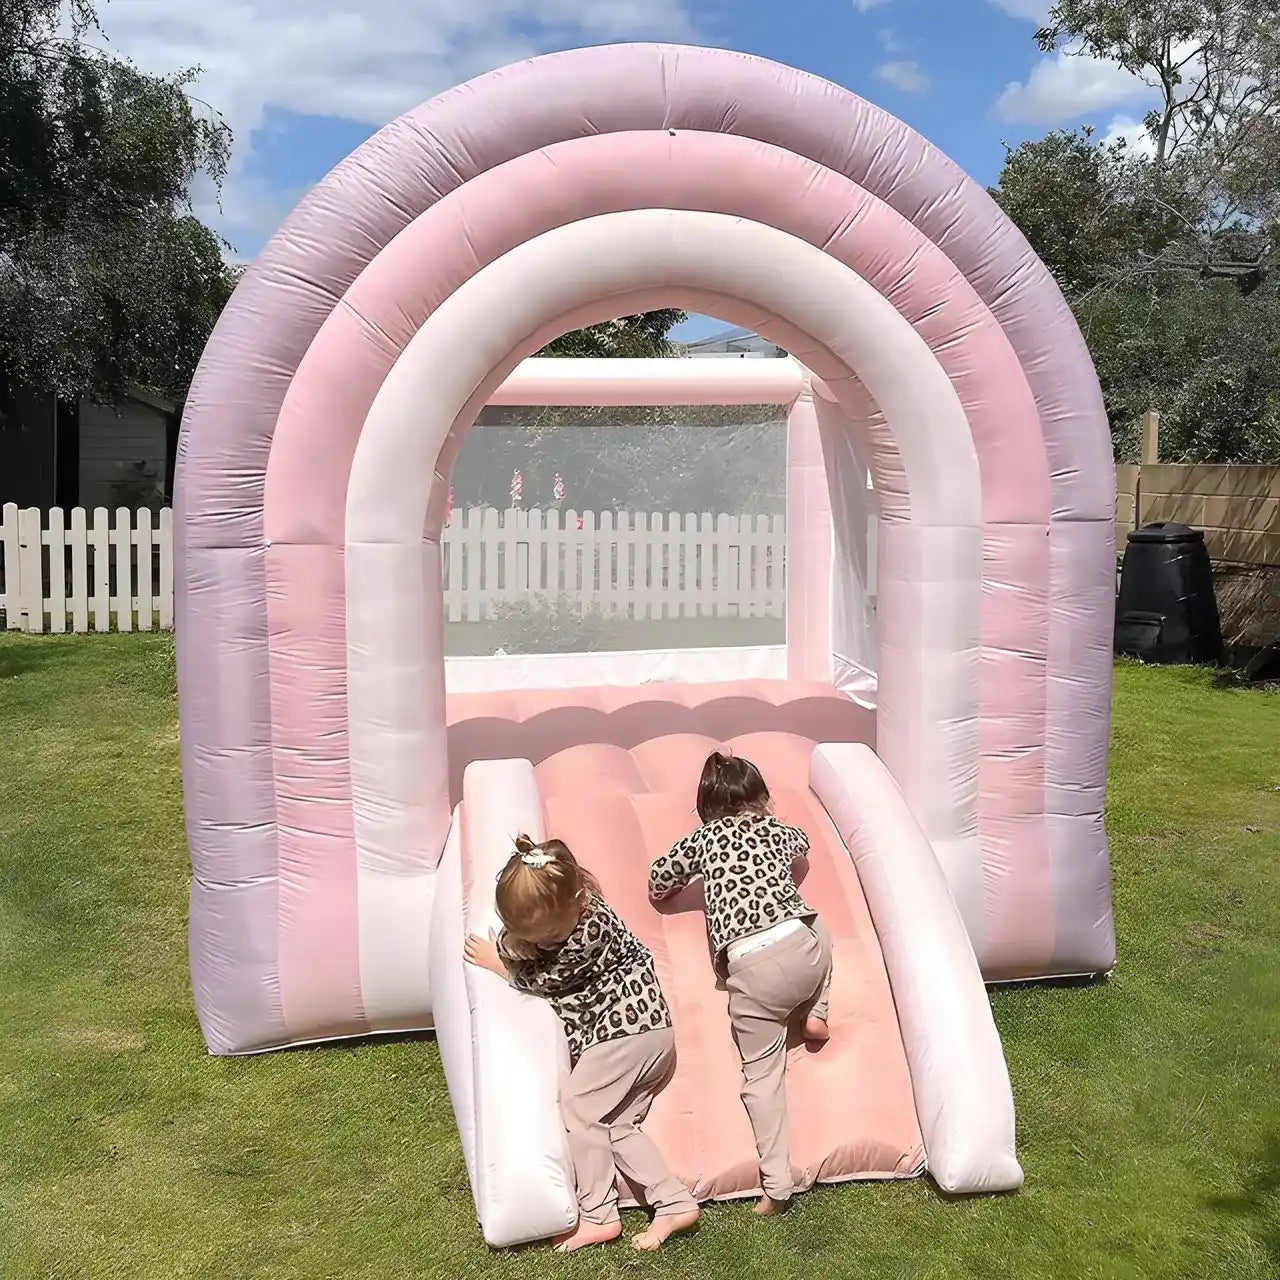 Best small bounce house for kids